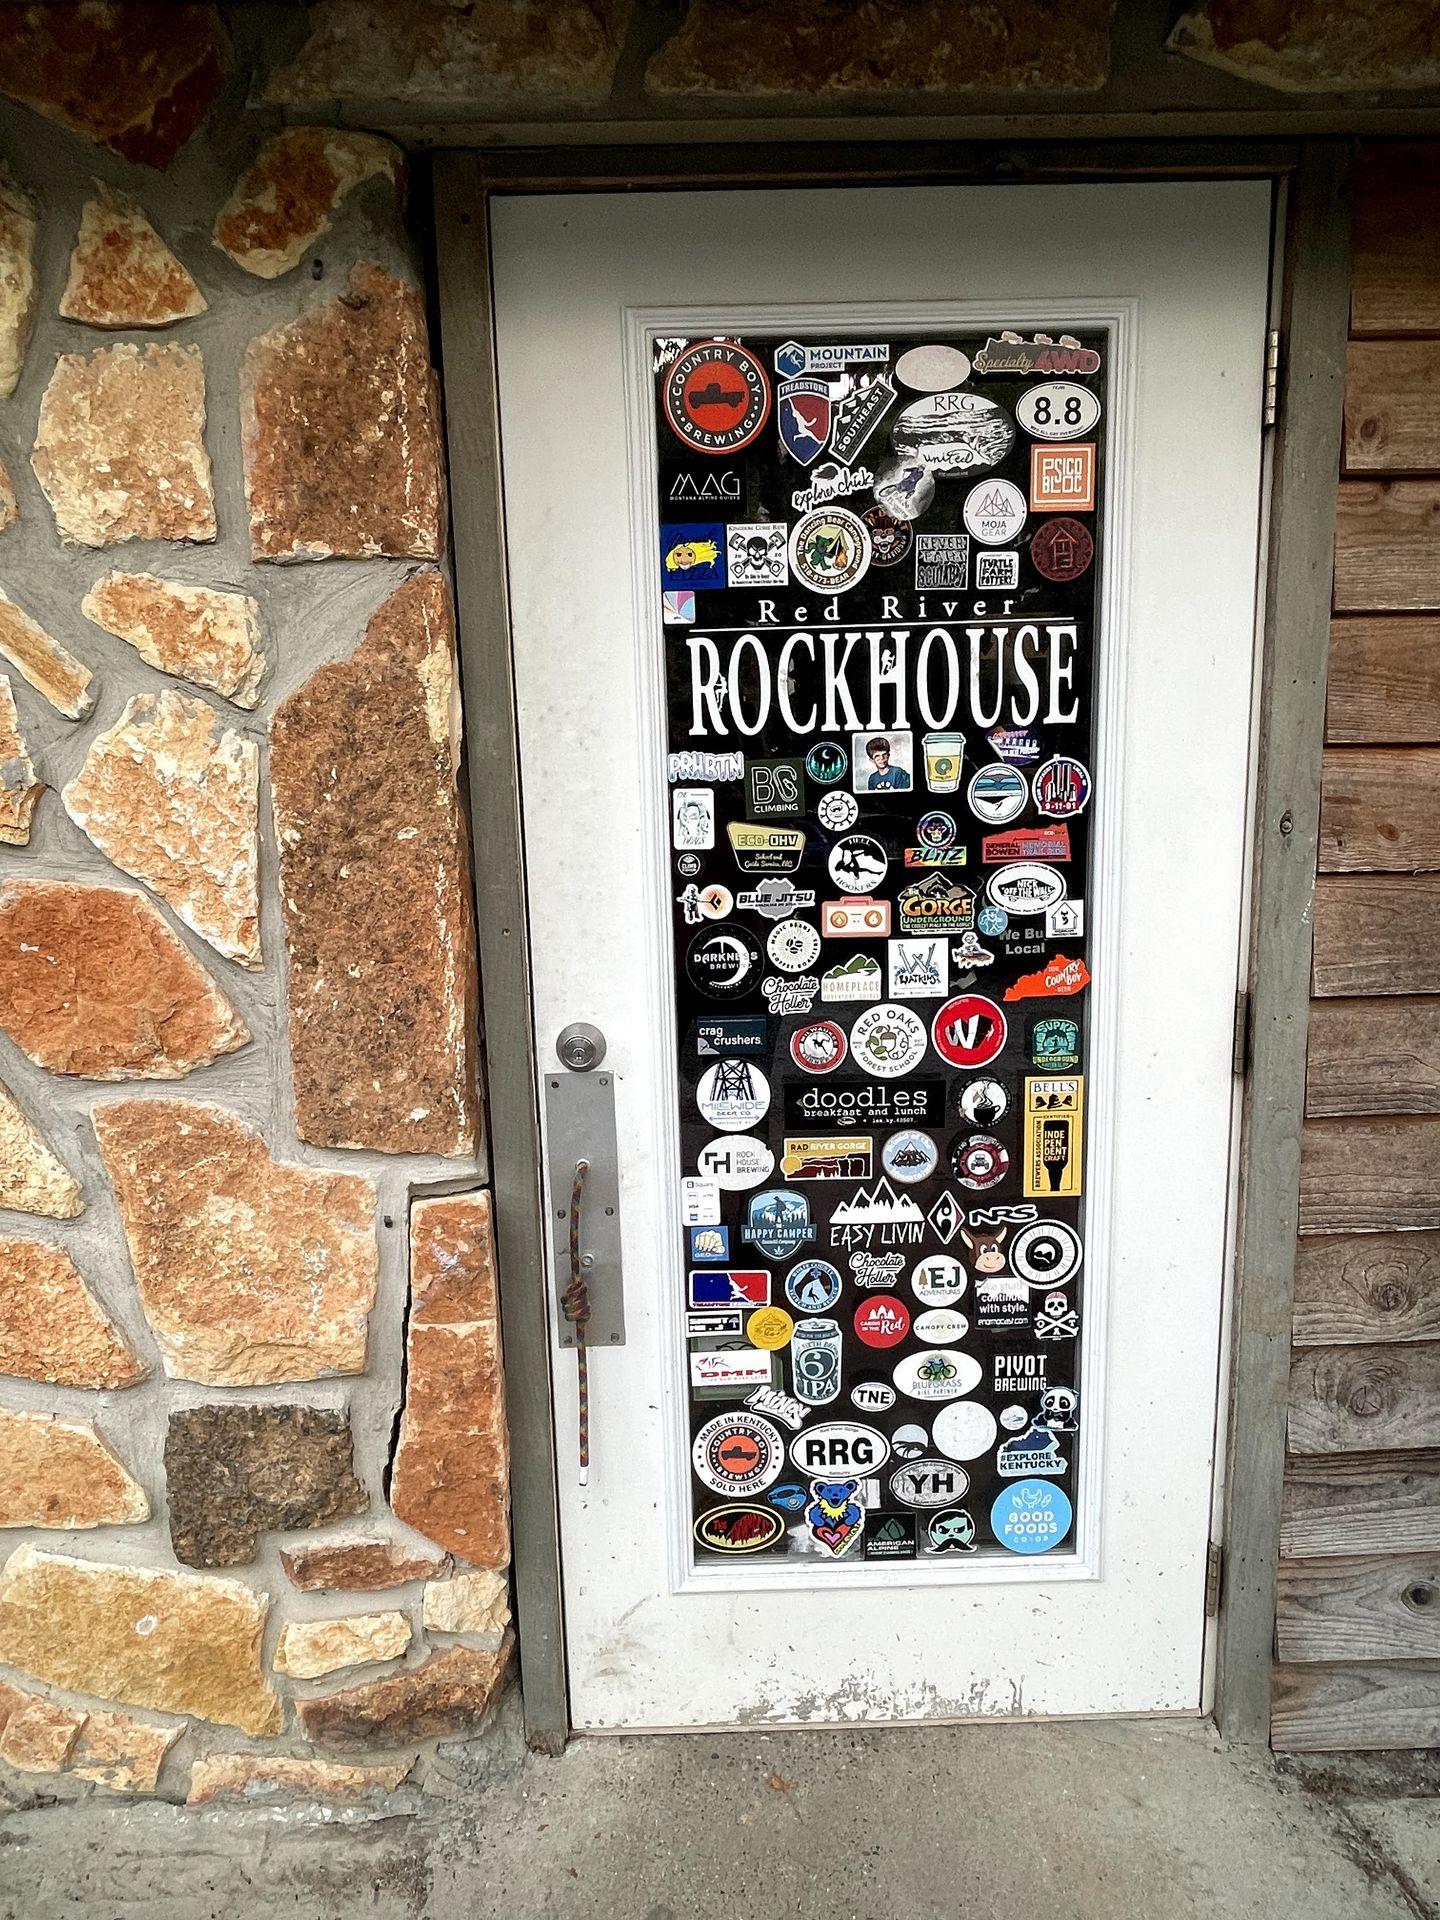 The door of Red River Rockhouse covered in stickers